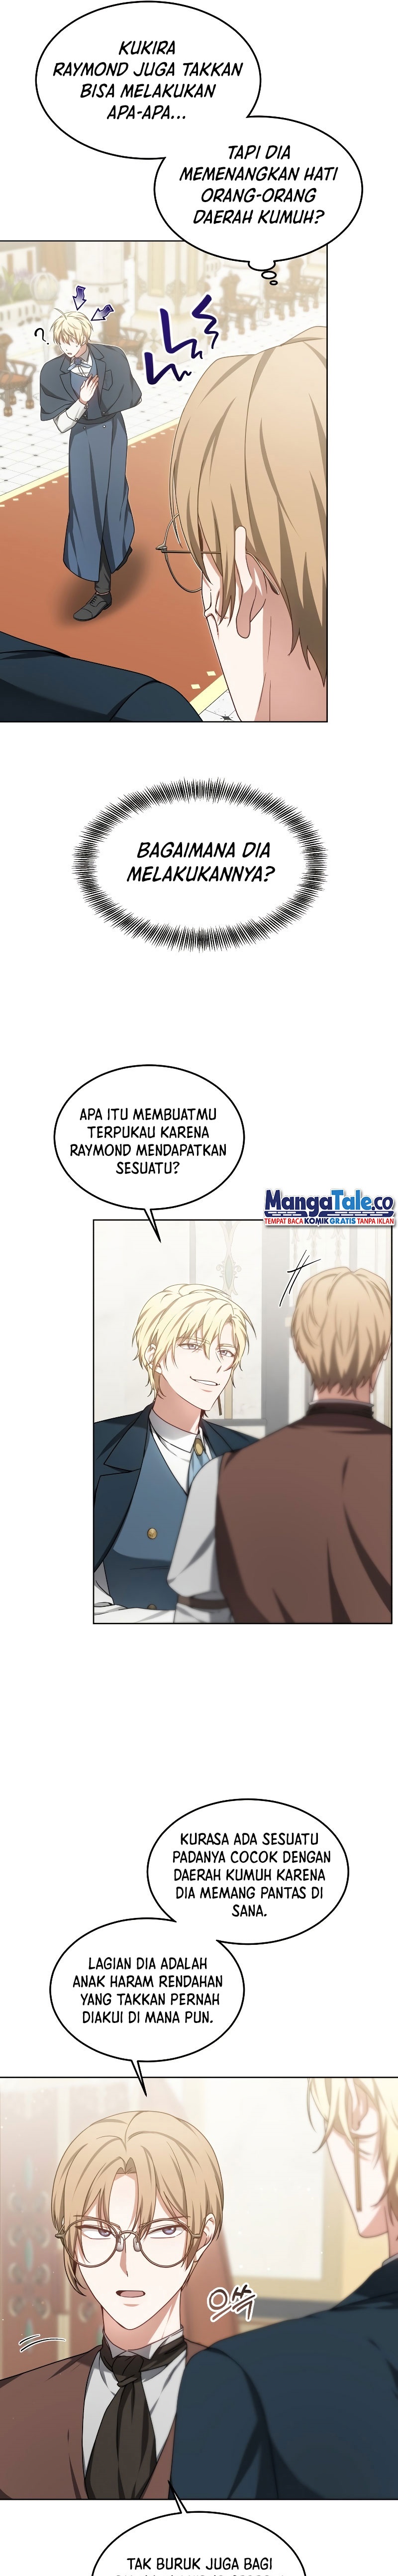 Dr. Player Chapter 32